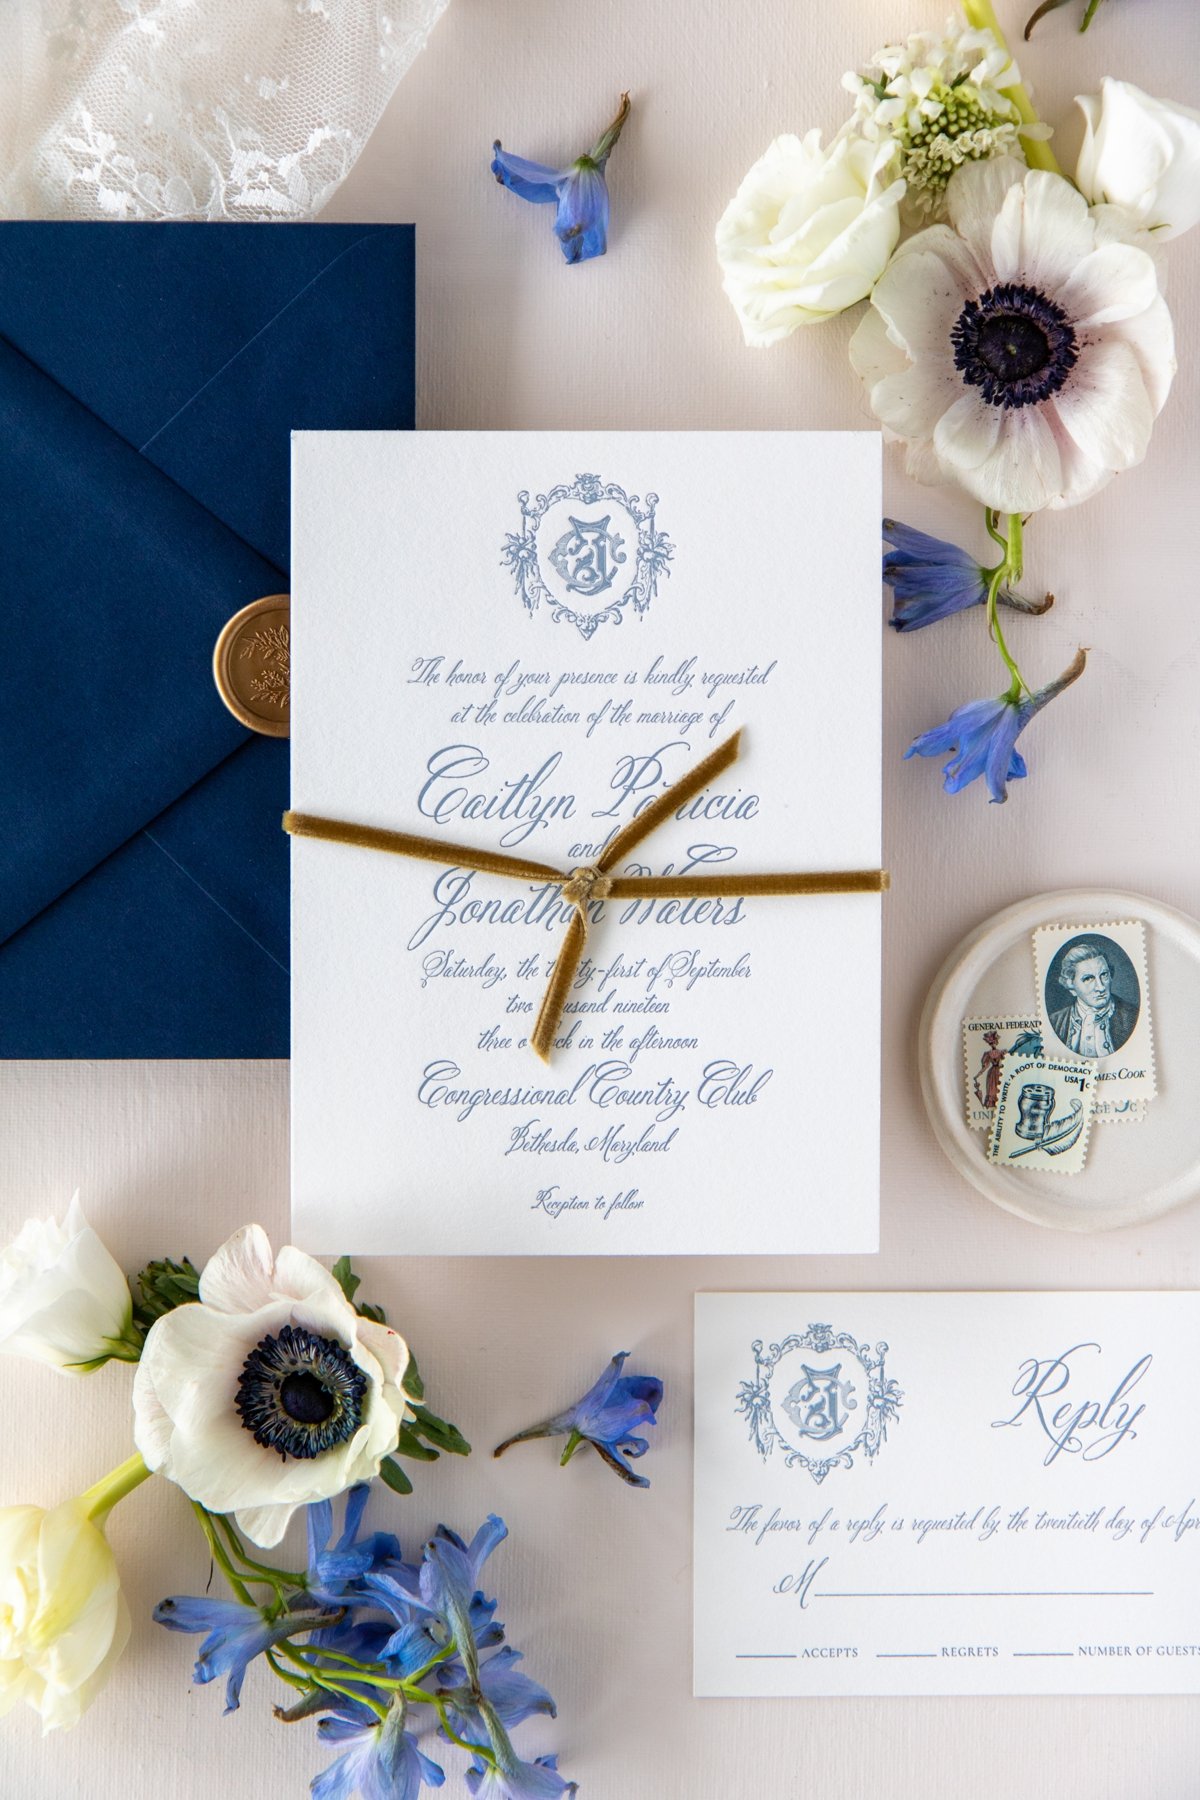 Custom wedding invitation suite by Turnage and Watts